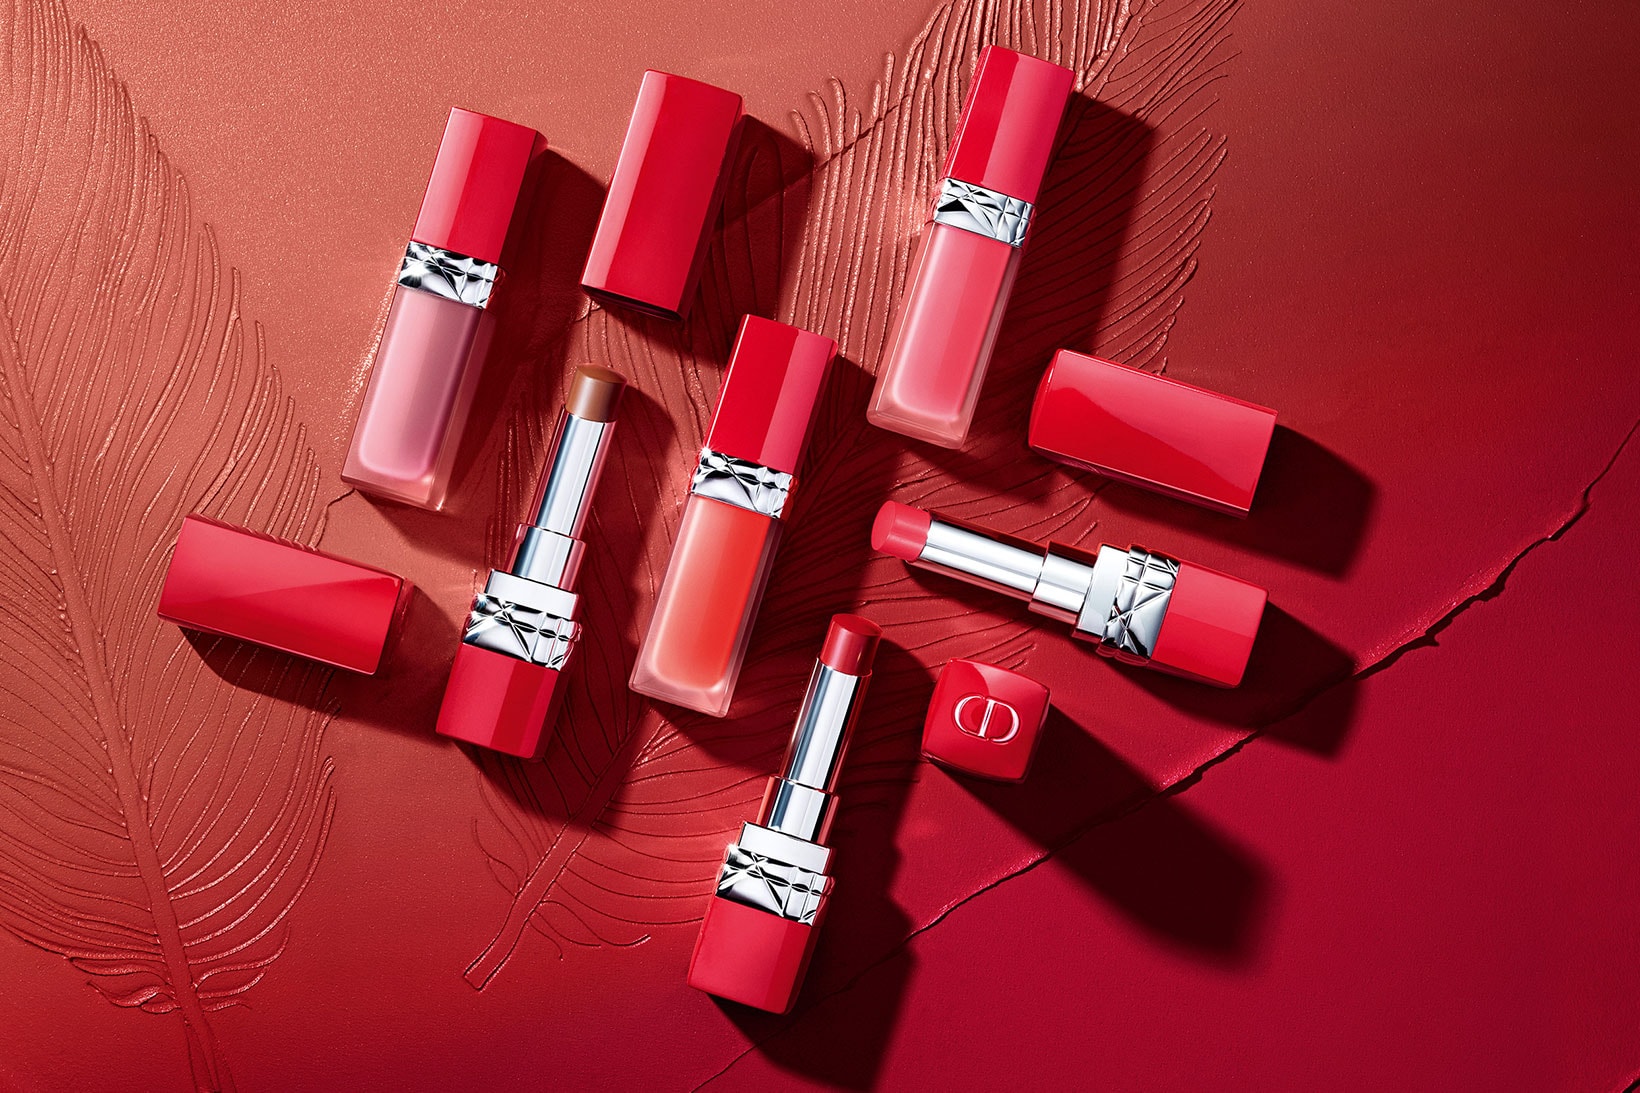 Dior Makeup Beauty Fall Collection Birds of a Feather Rouge Lipsticks